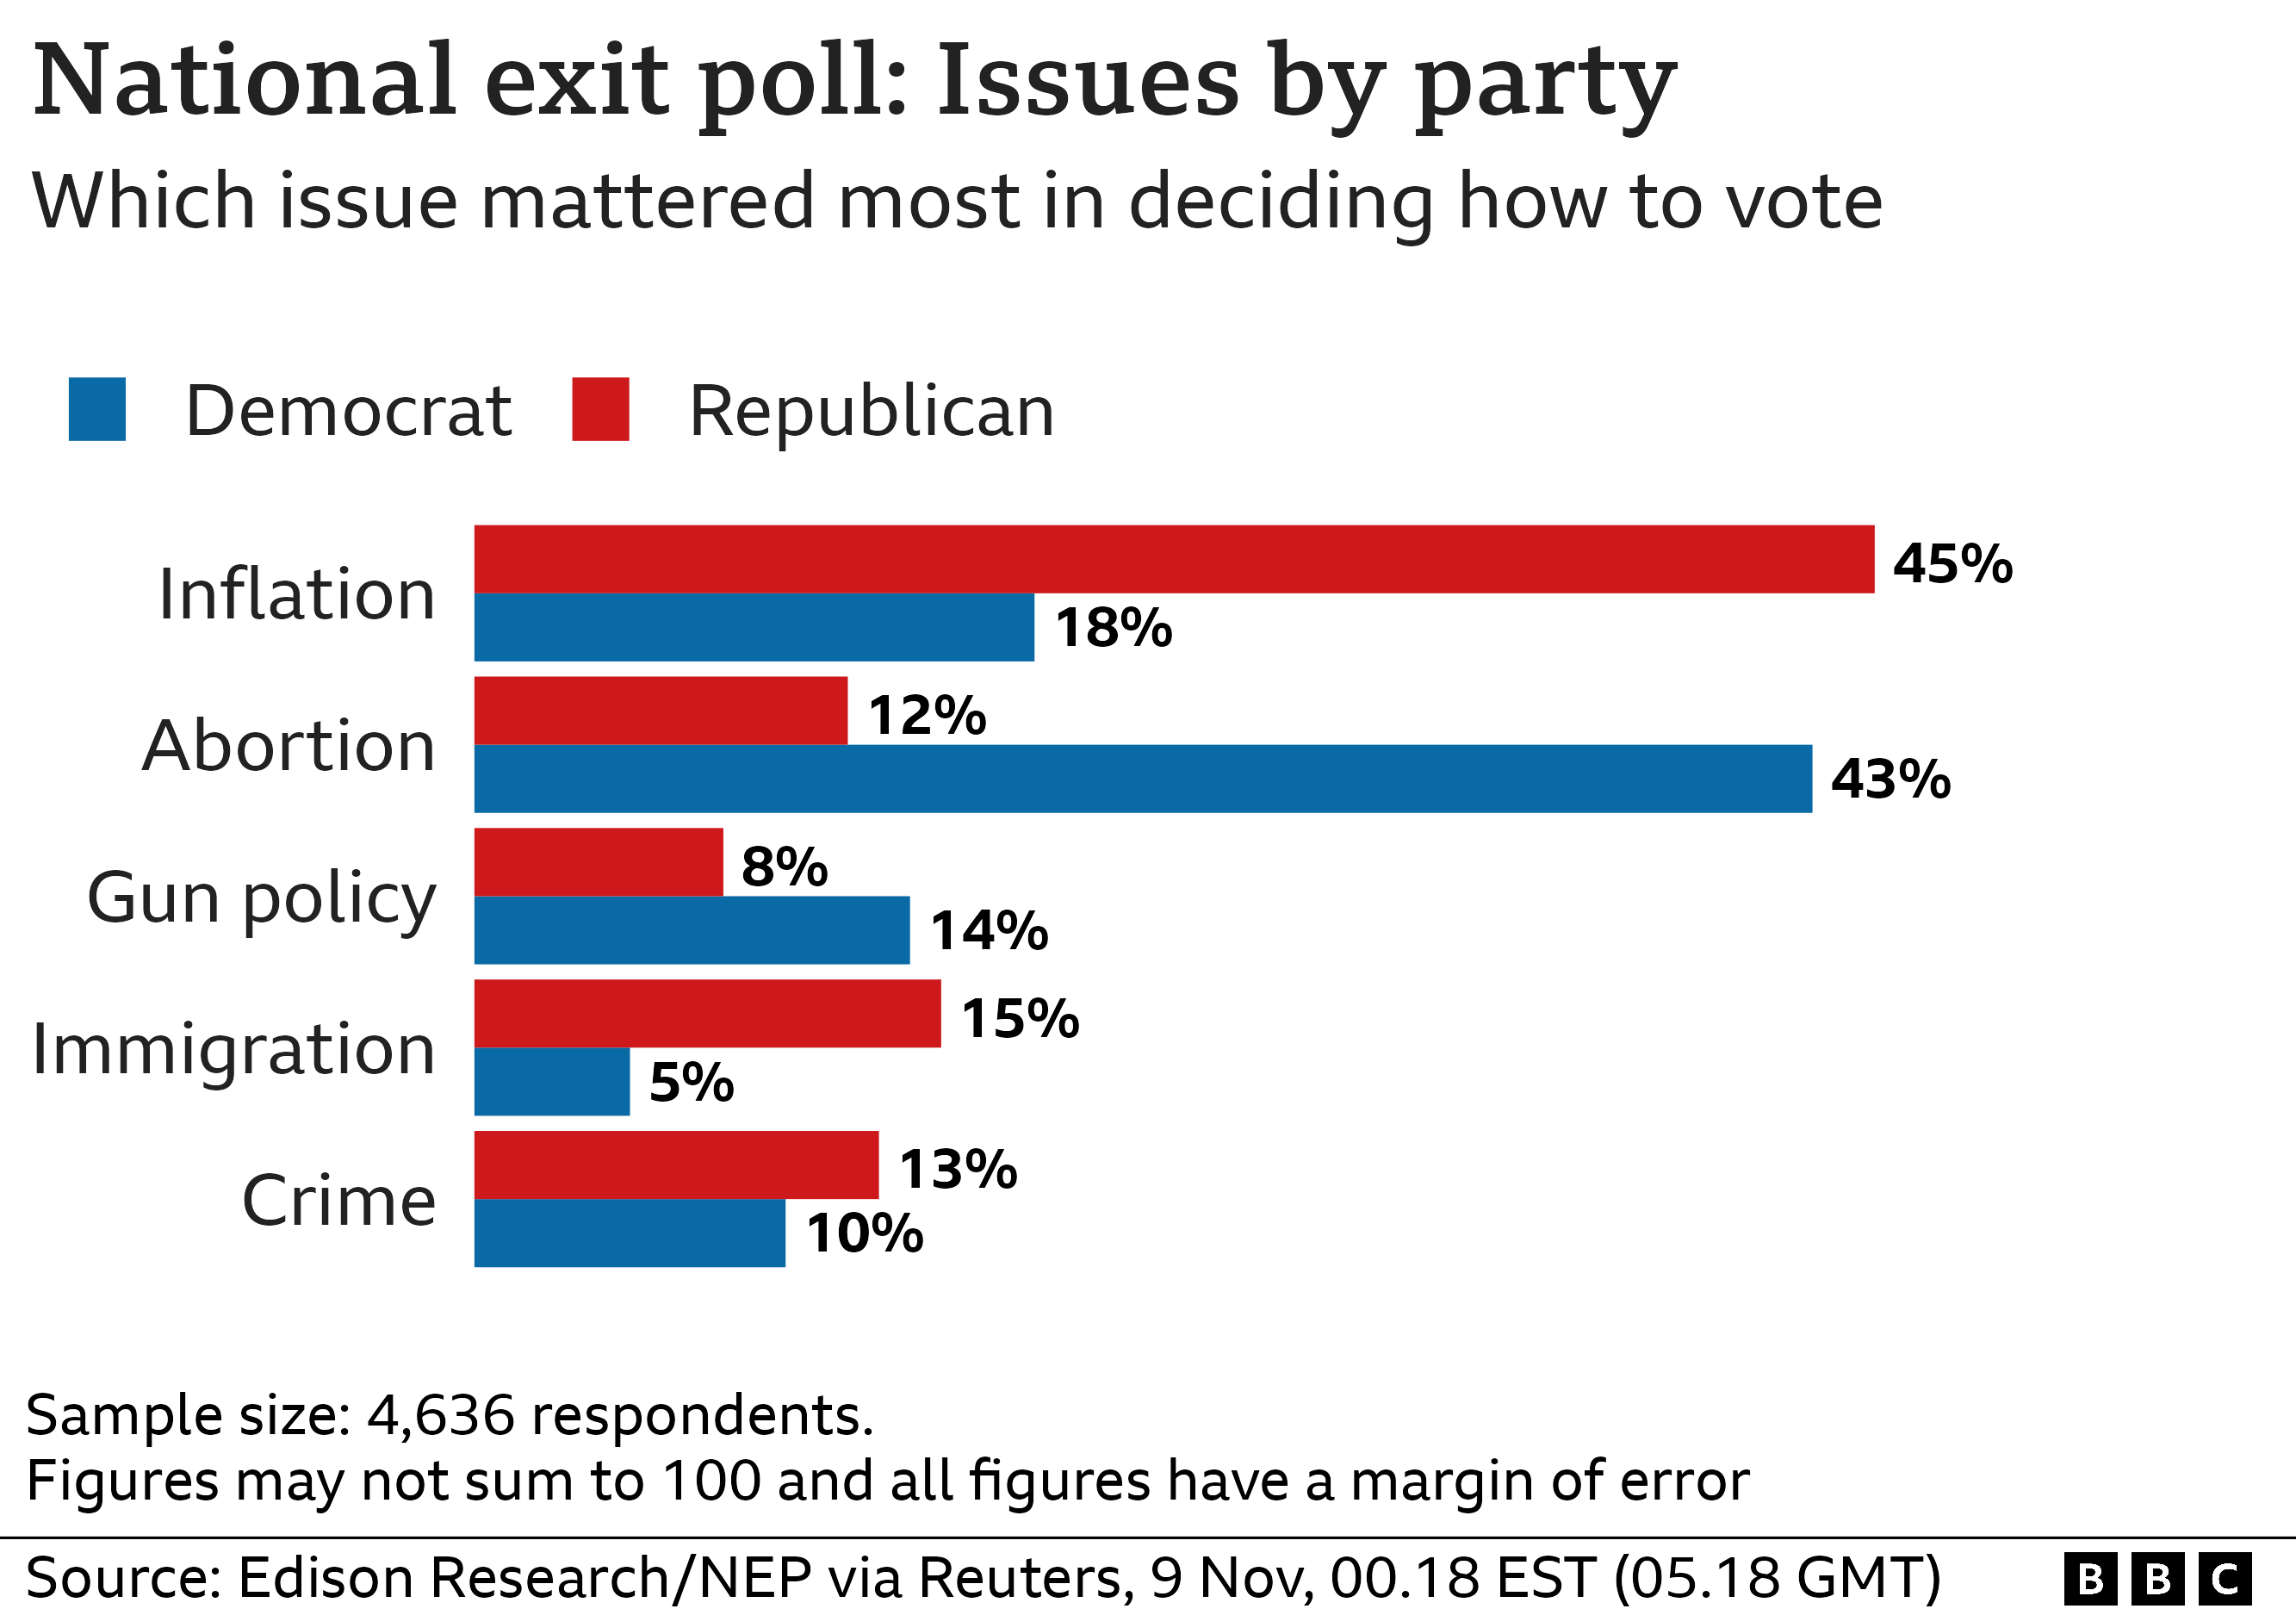 Exit poll: How the five key issues are split along party lines. 45% of Republicans put inflation top whereas 43% of Democrats put abortion.